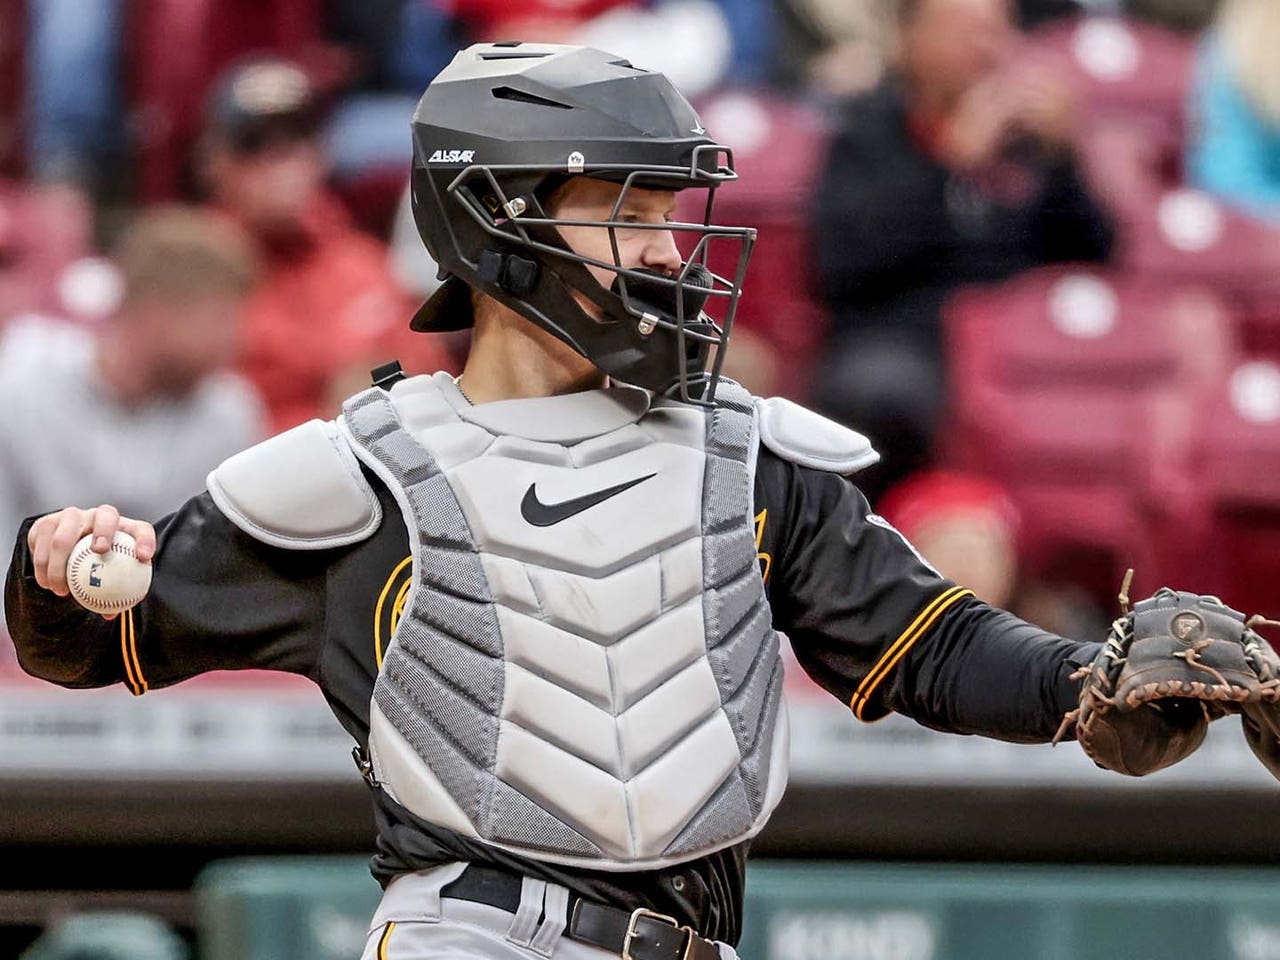 Pirates forced to use emergency catcher — it did not go well